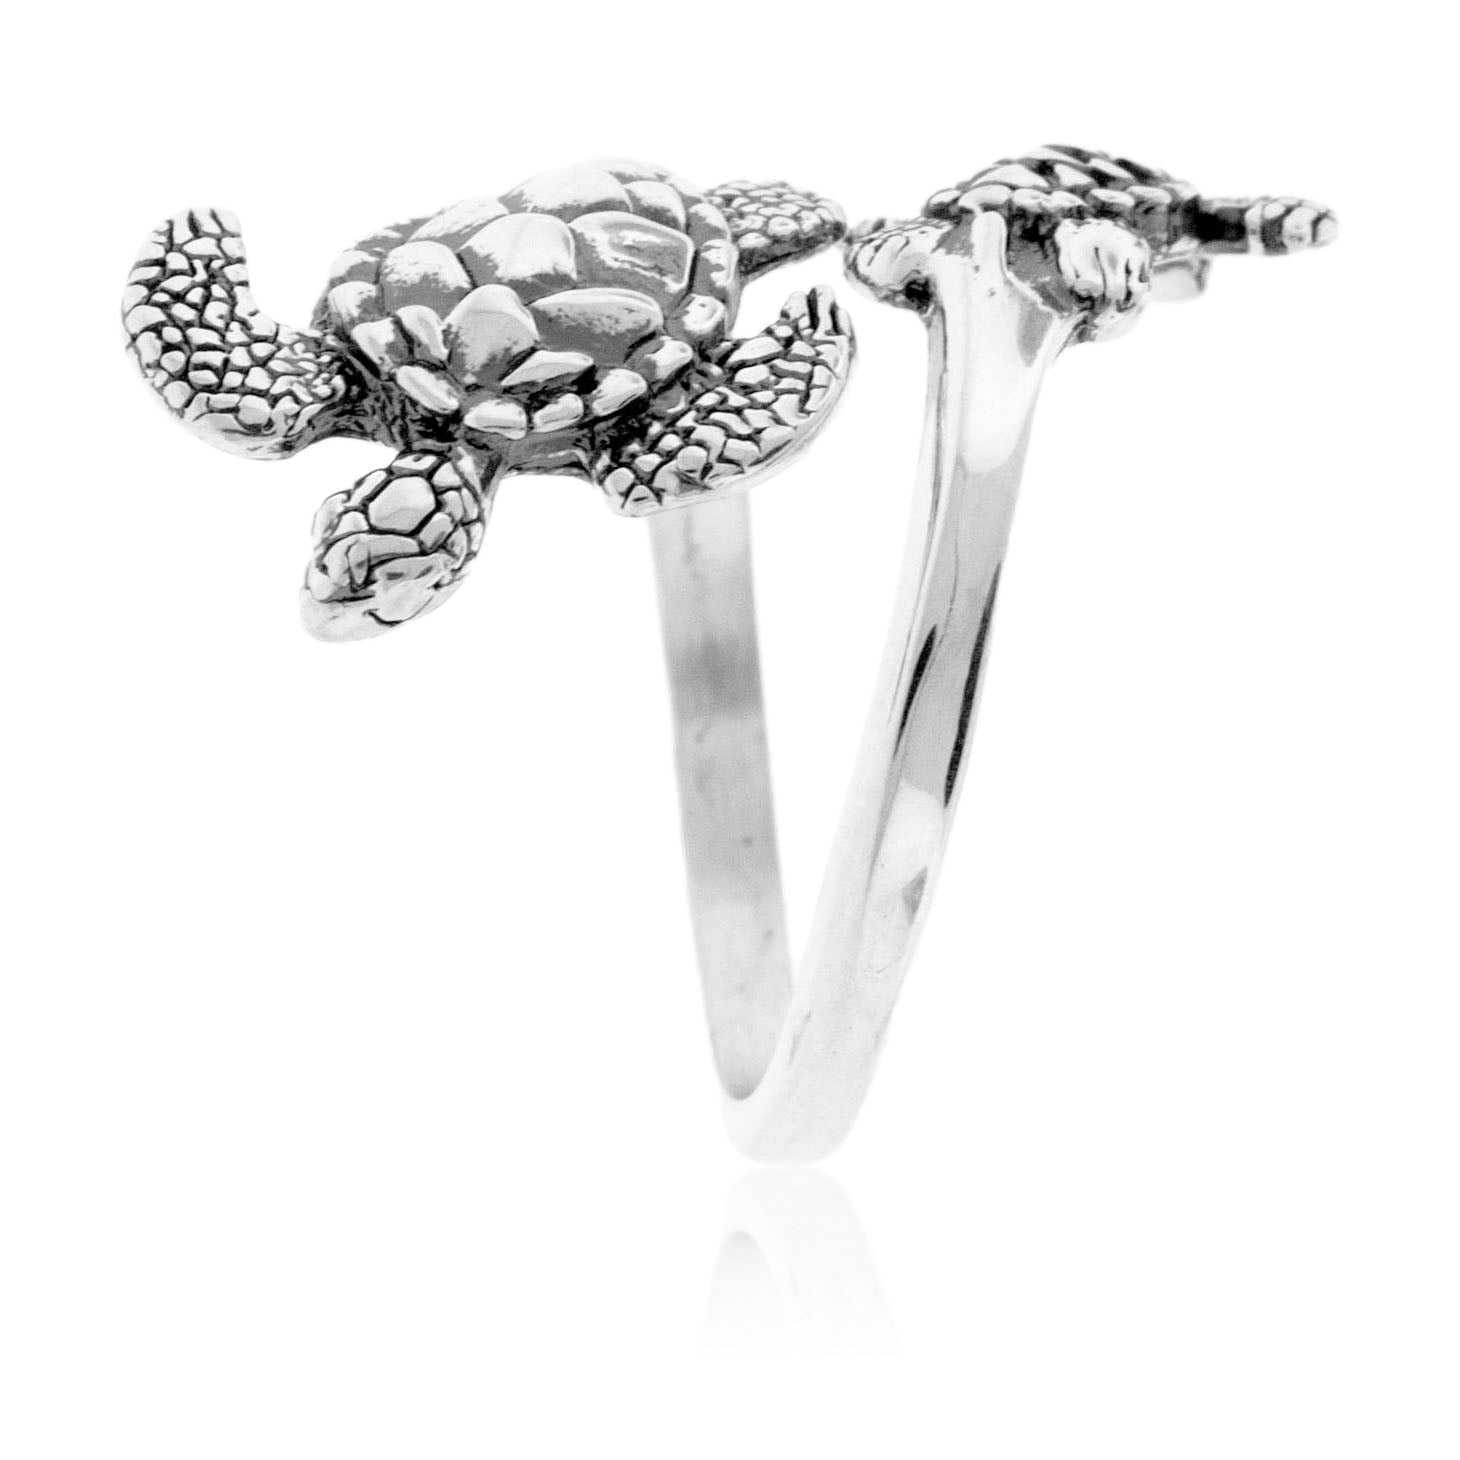 Sujal Impex Bikers jewelry Decent Design Tortoise Turtle Charm Best Quality  Silver Metal Ring For Men And Women